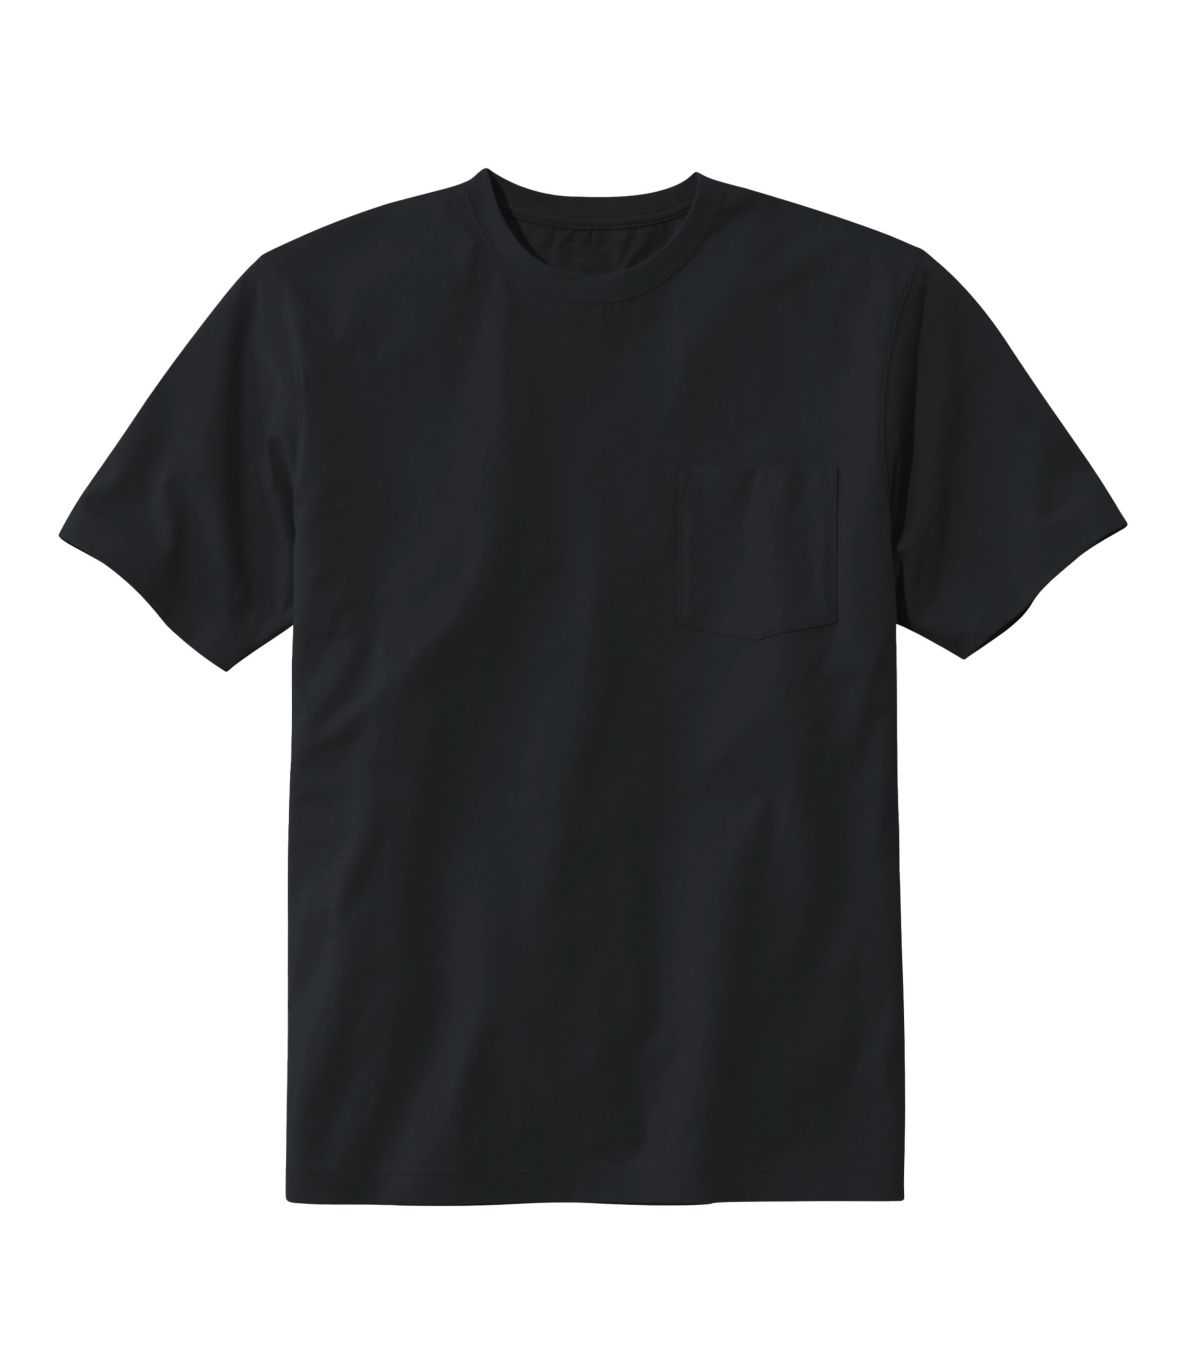 Men's Carefree Non-Shrink Tee with Pocket, Traditional Fit Navy Blue Large, Cotton L.L.Bean